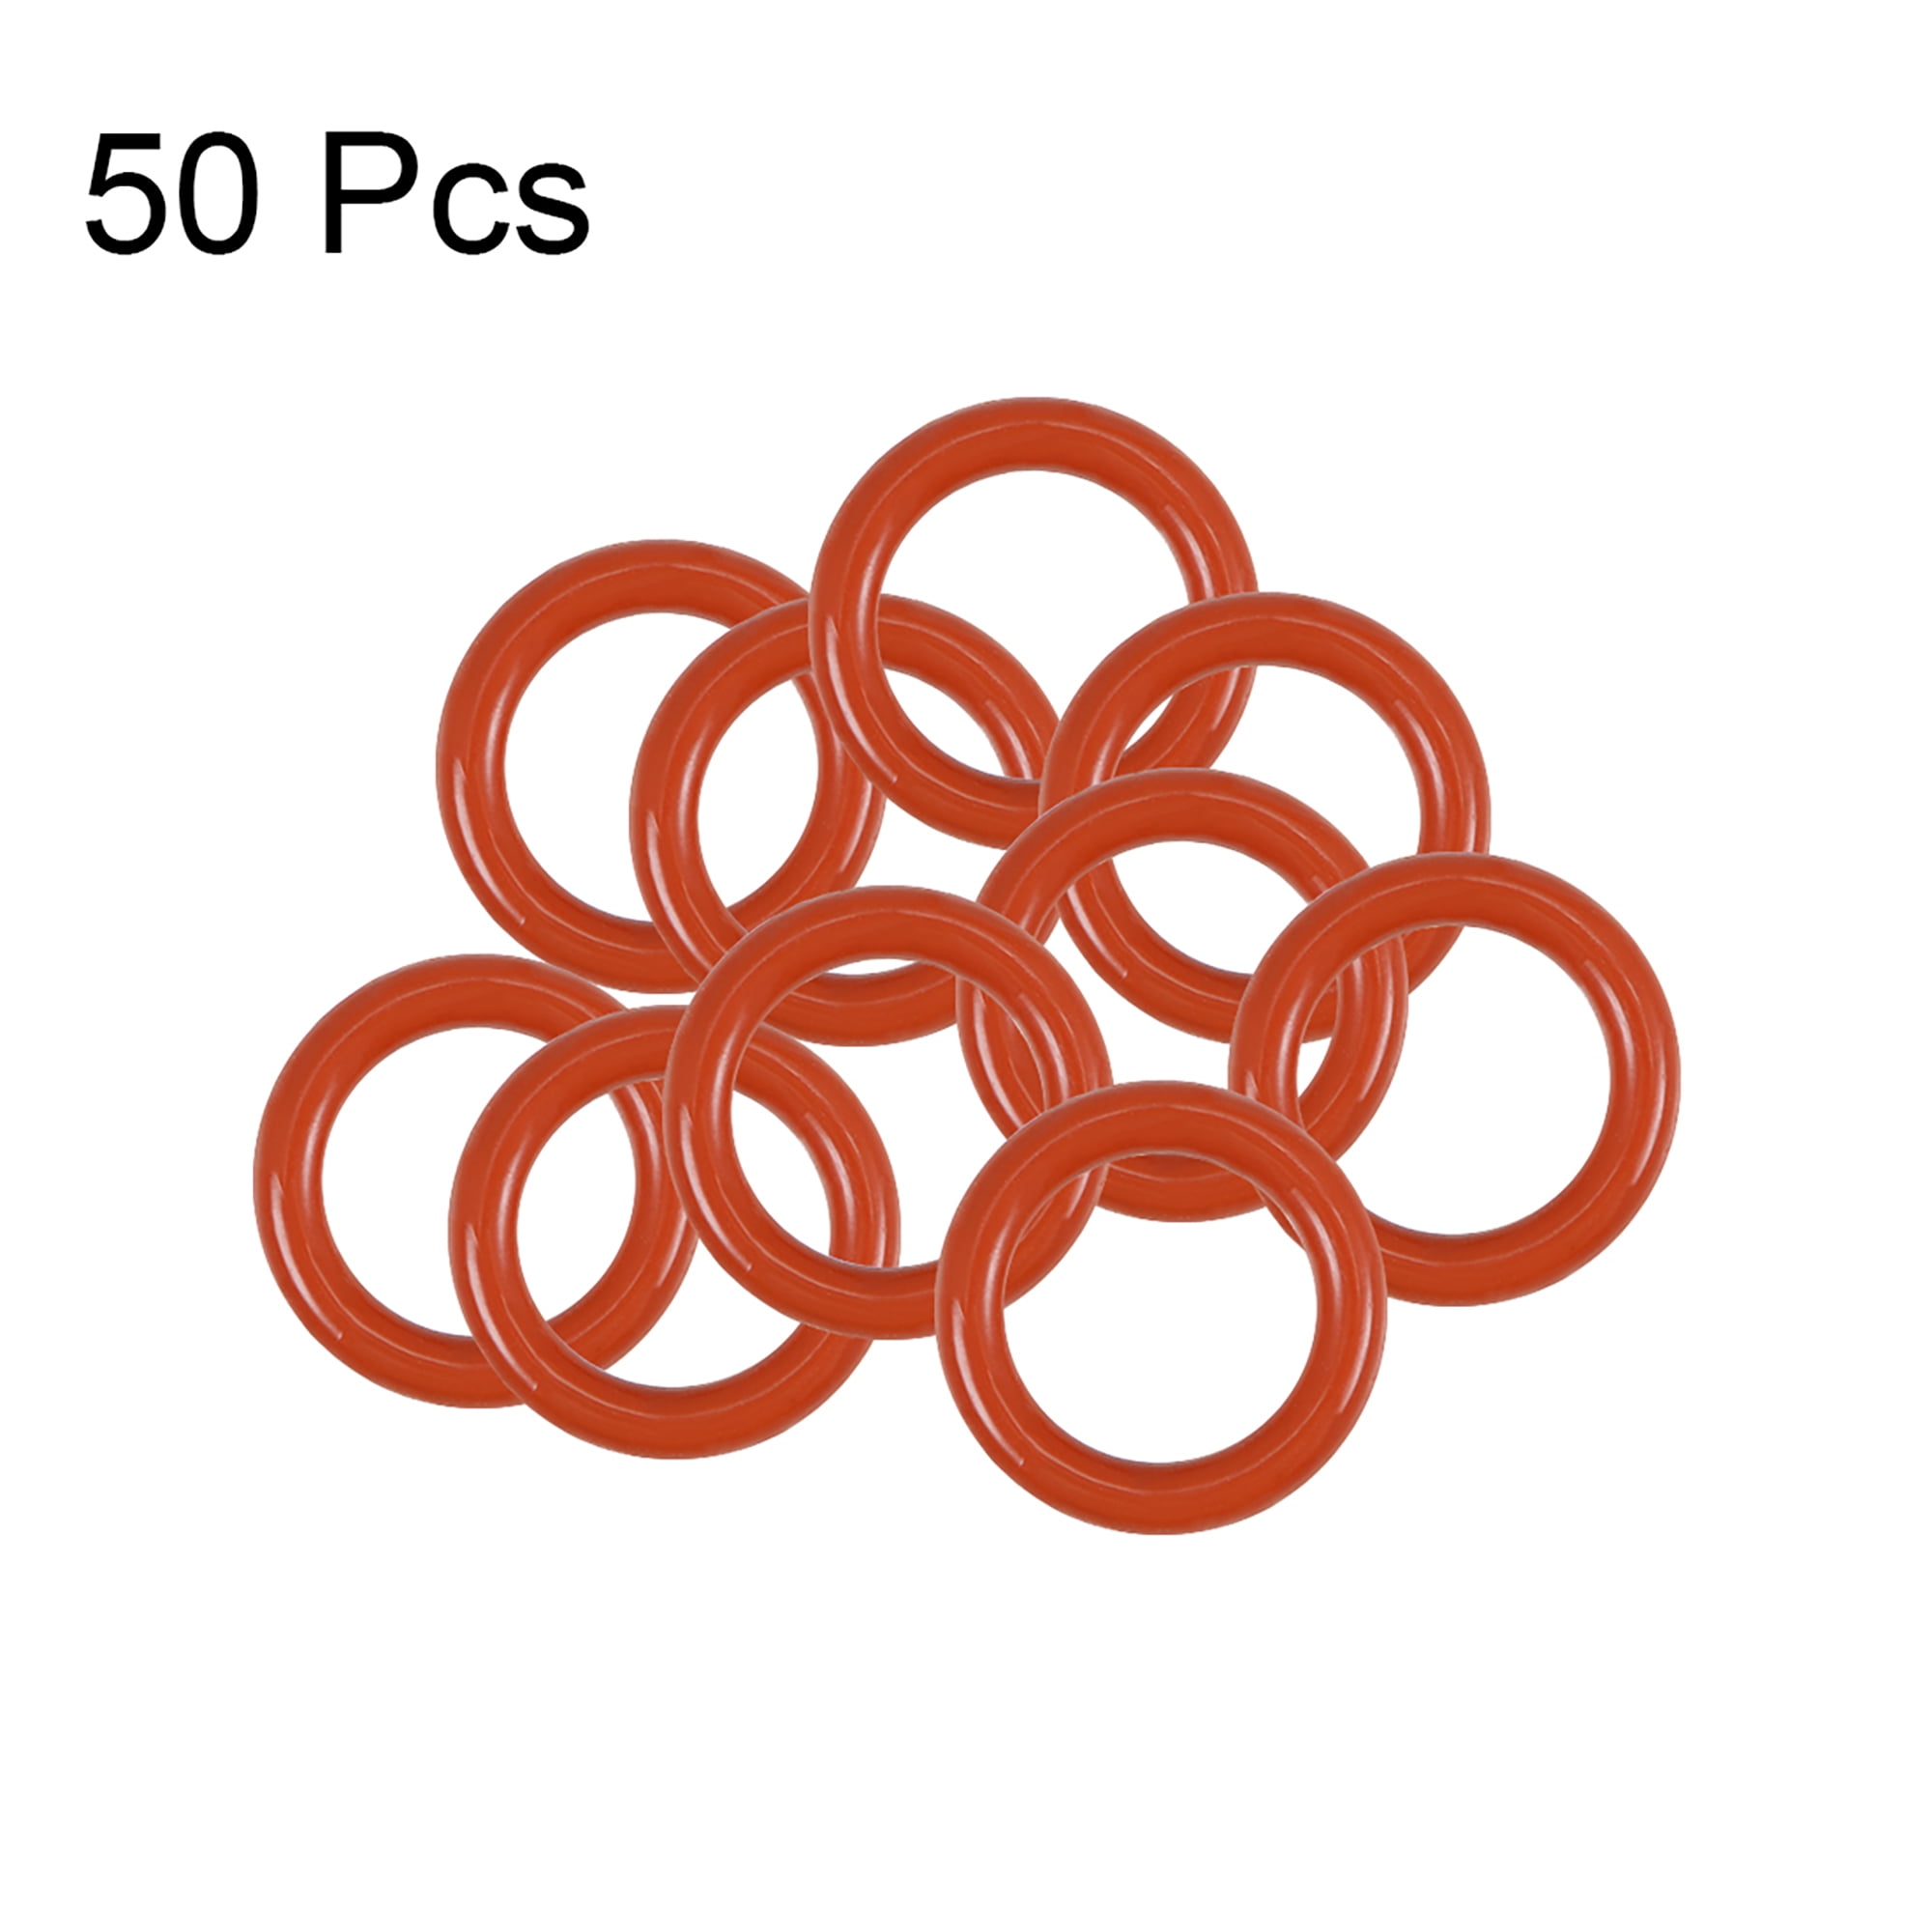 50pcs Silicone Rubber O-Ring 20-70mm Washer Seals Gasket 1.5mm Red 